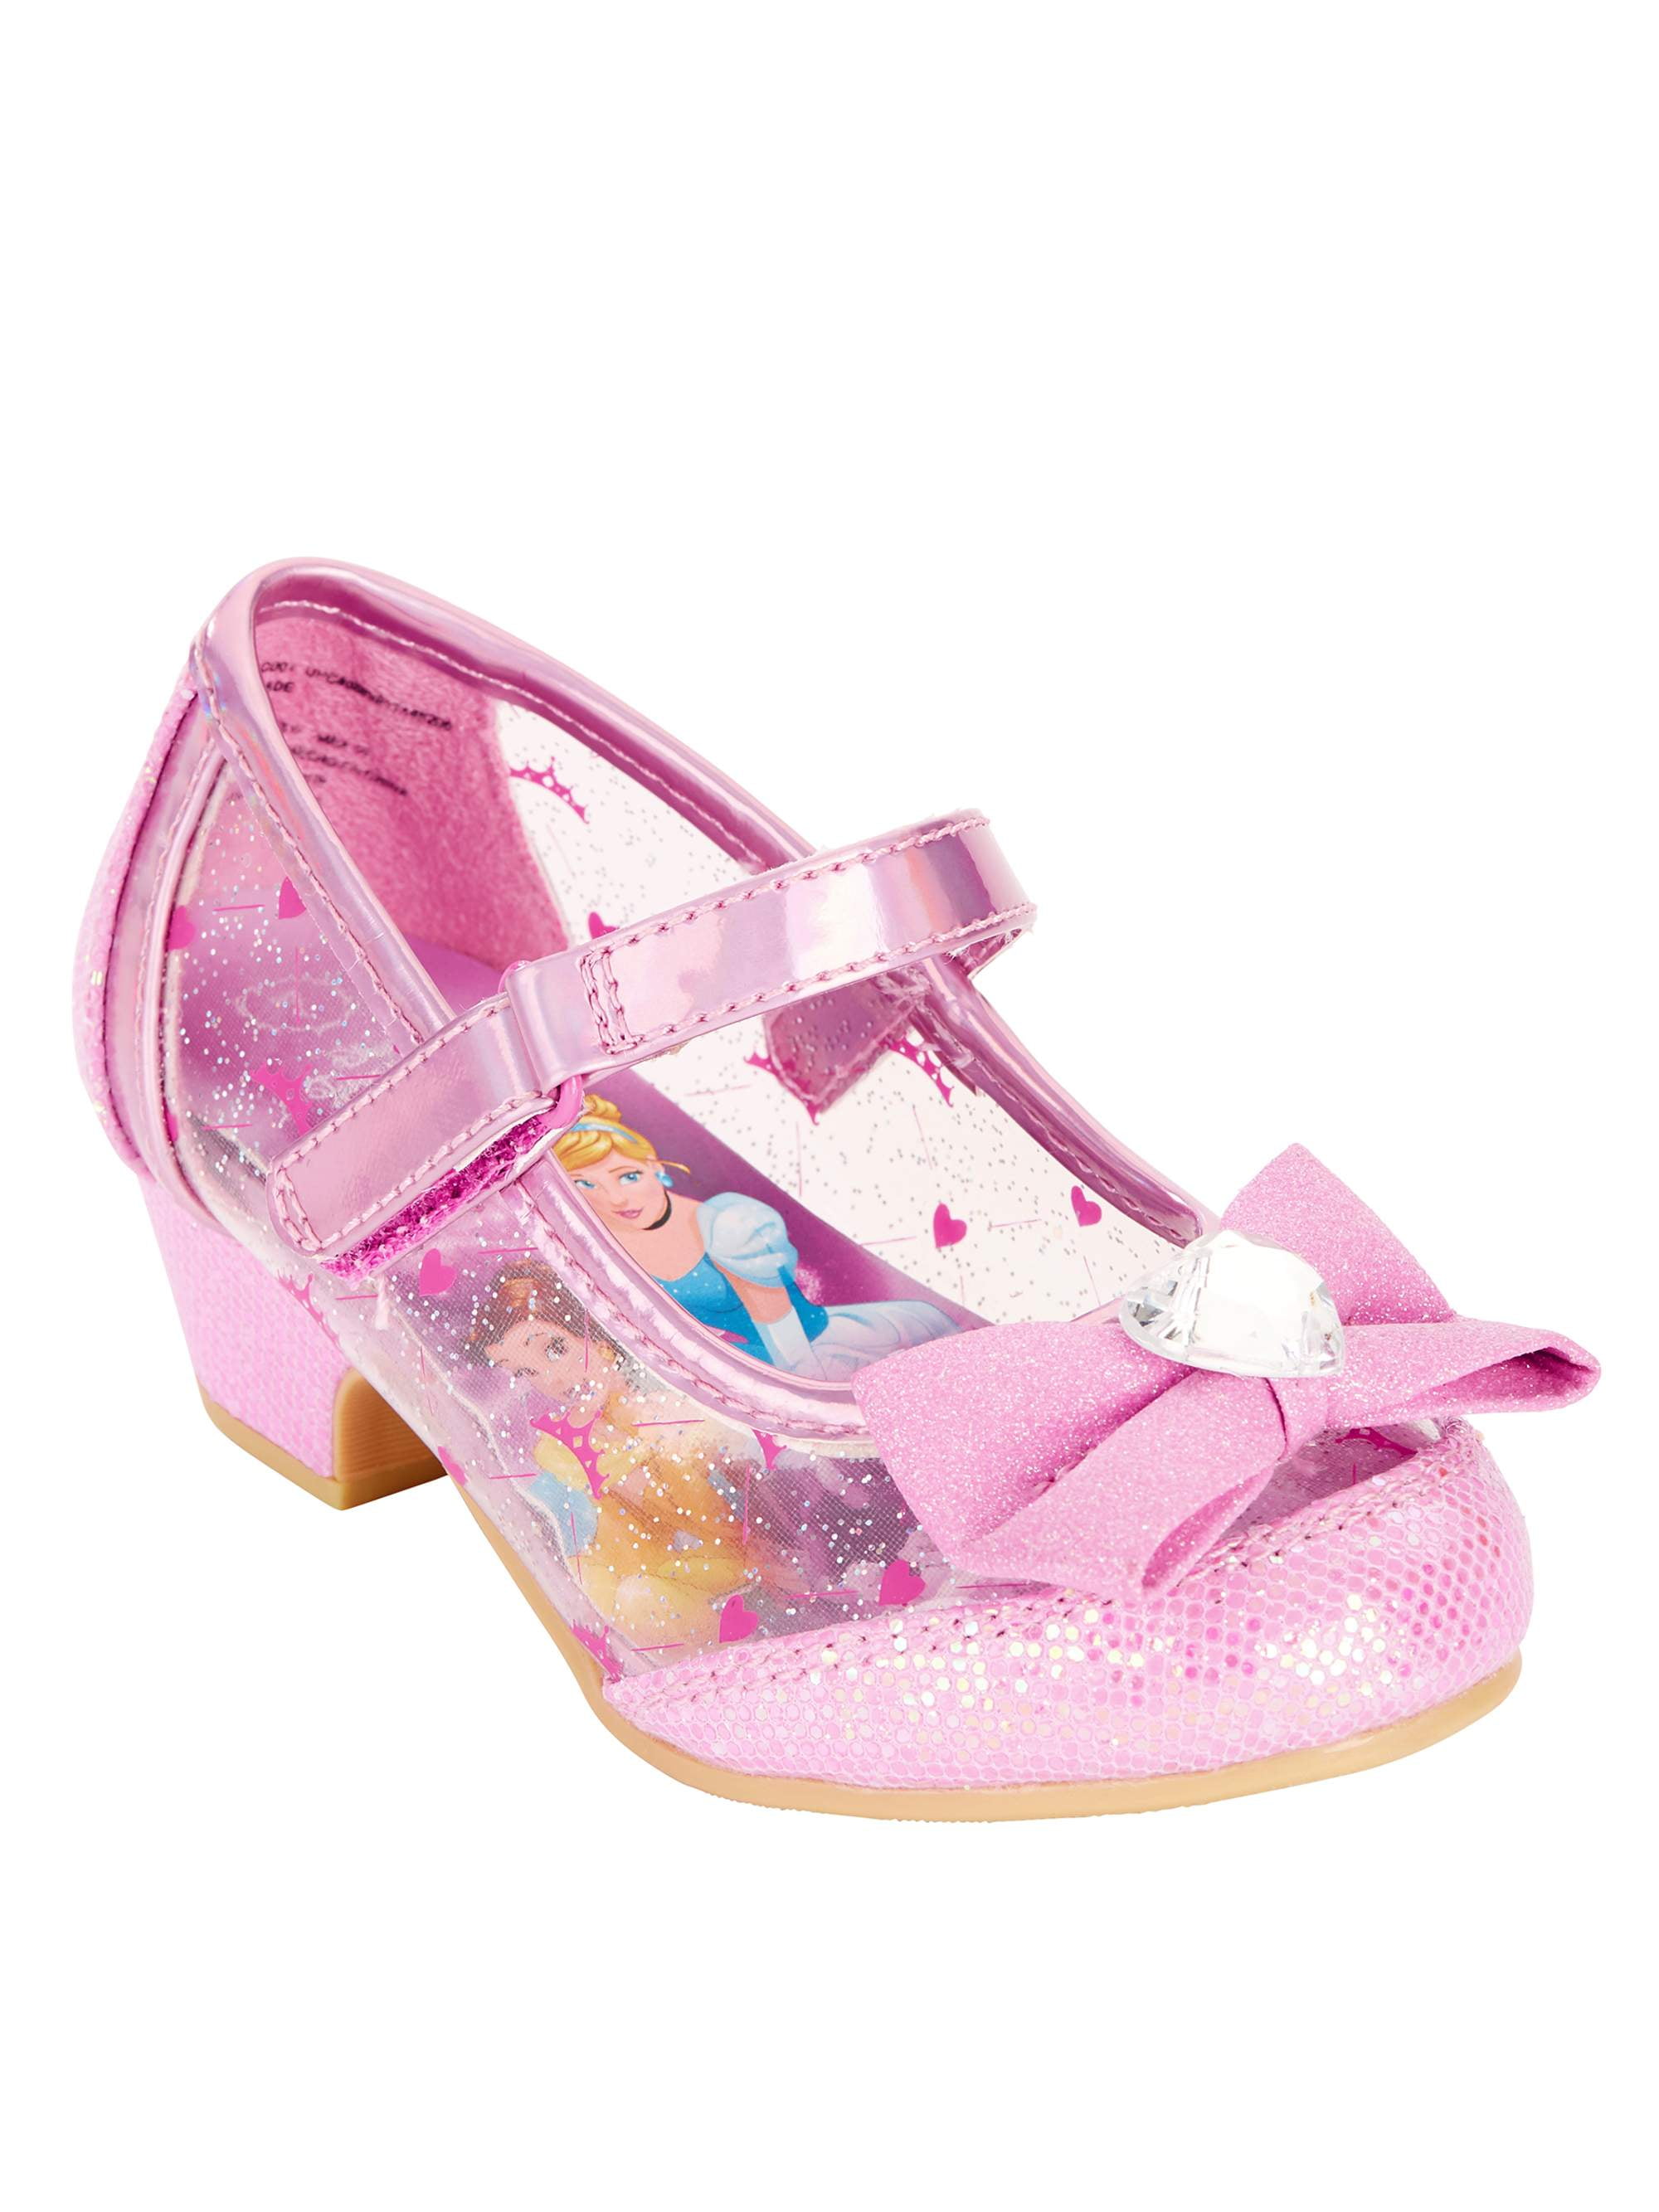 disney belle shoes for adults